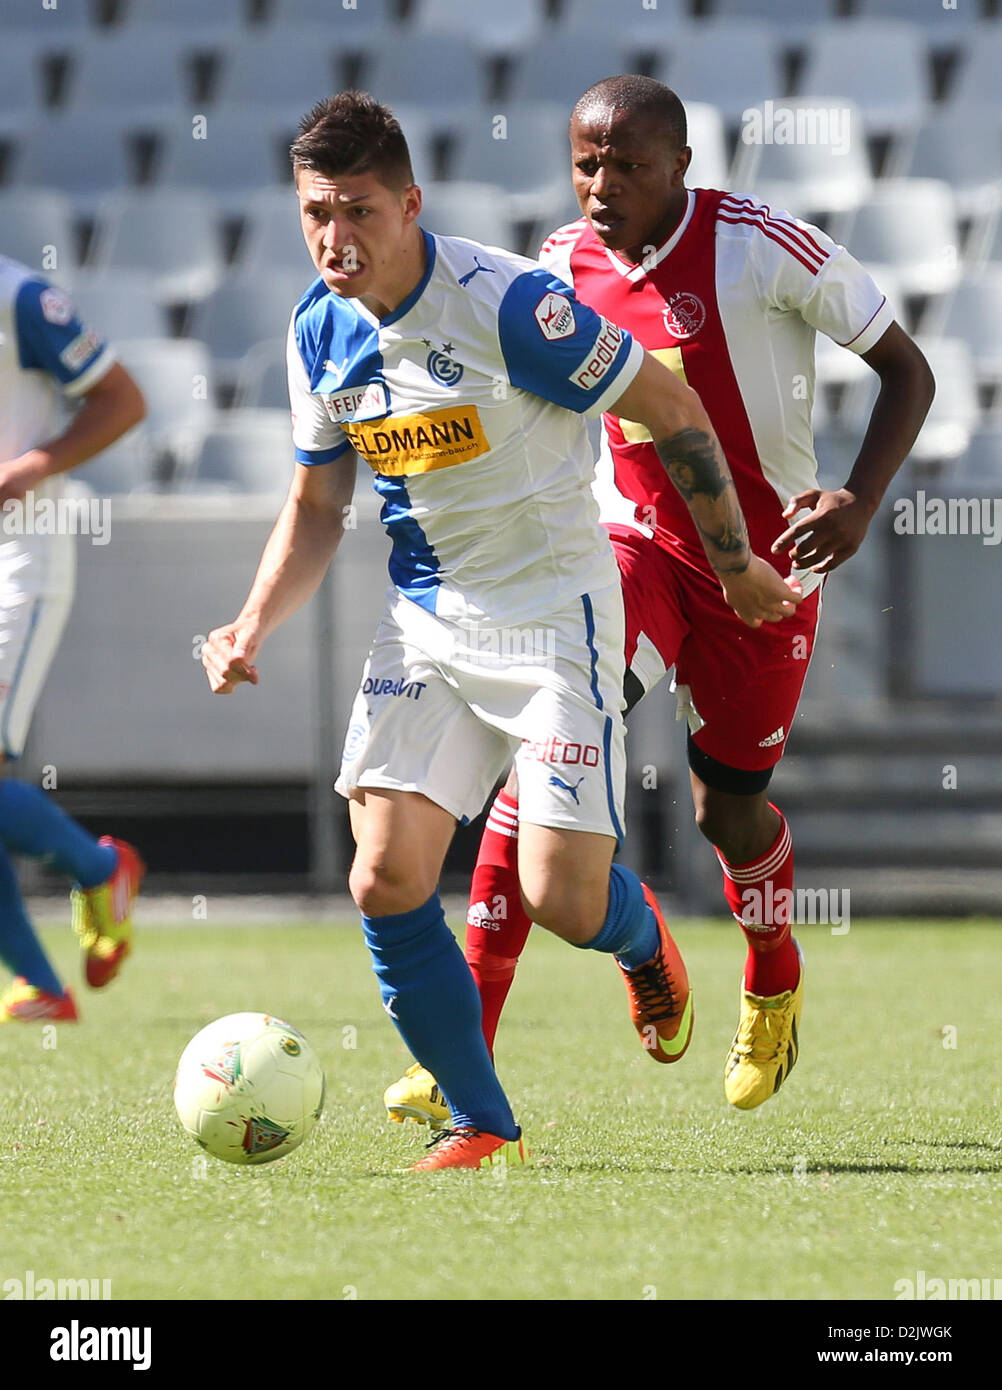 CAPE TOWN, South Africa - Saturday 26 January 2013, Steven Zuber of Grasshopper Club Zurich during the soccer/football match Grasshopper Club Zurich (Switzerland) and Ajax Cape Town at the Cape Town stadium. Photo by Roger Sedres/ImageSA/ Alamy Live News Stock Photo